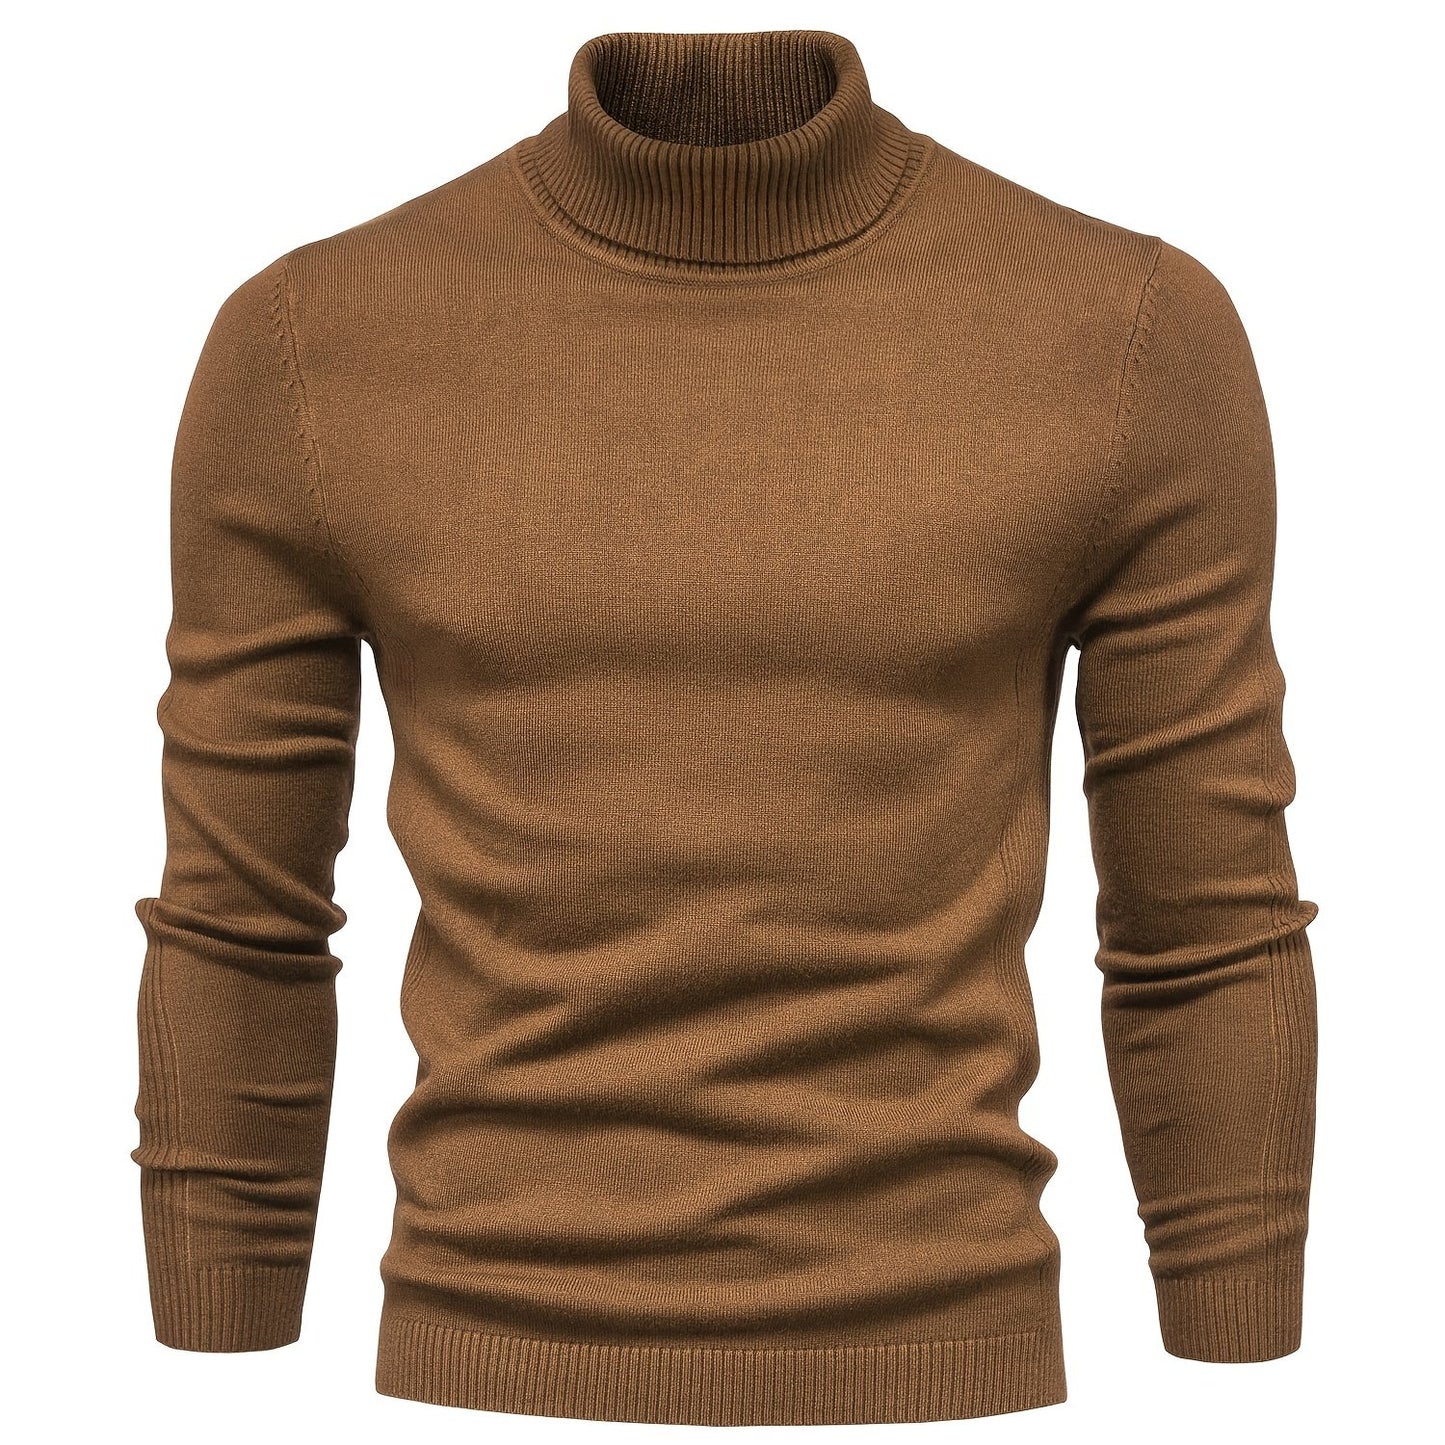 Foruwish - All Match Best Sellers Autumn Winter Pullover Men Solid Turtleneck Sweaters